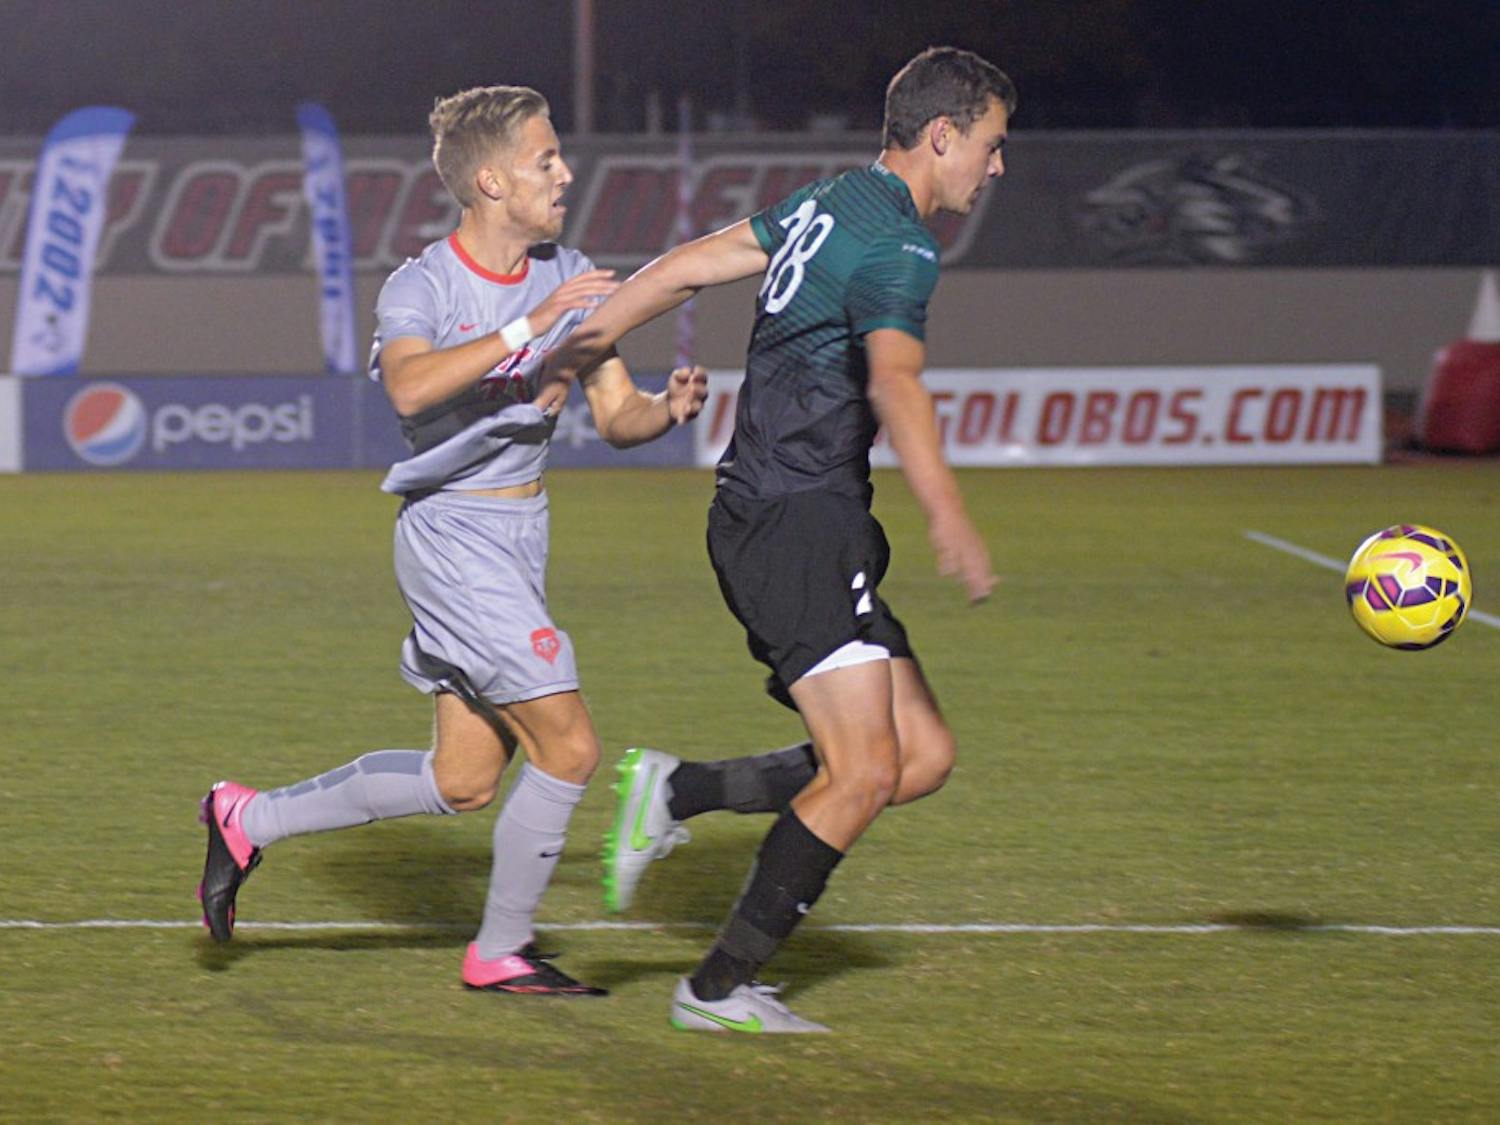 New Mexico forward Sam Gleadle battles a Charlotte player for the ball during their game at the UNM Soccer Complex Oct. 27. The Lobos play Florida Atlantic at 7 p.m. Friday in hopes of qualifying for the Conference USA tournament.